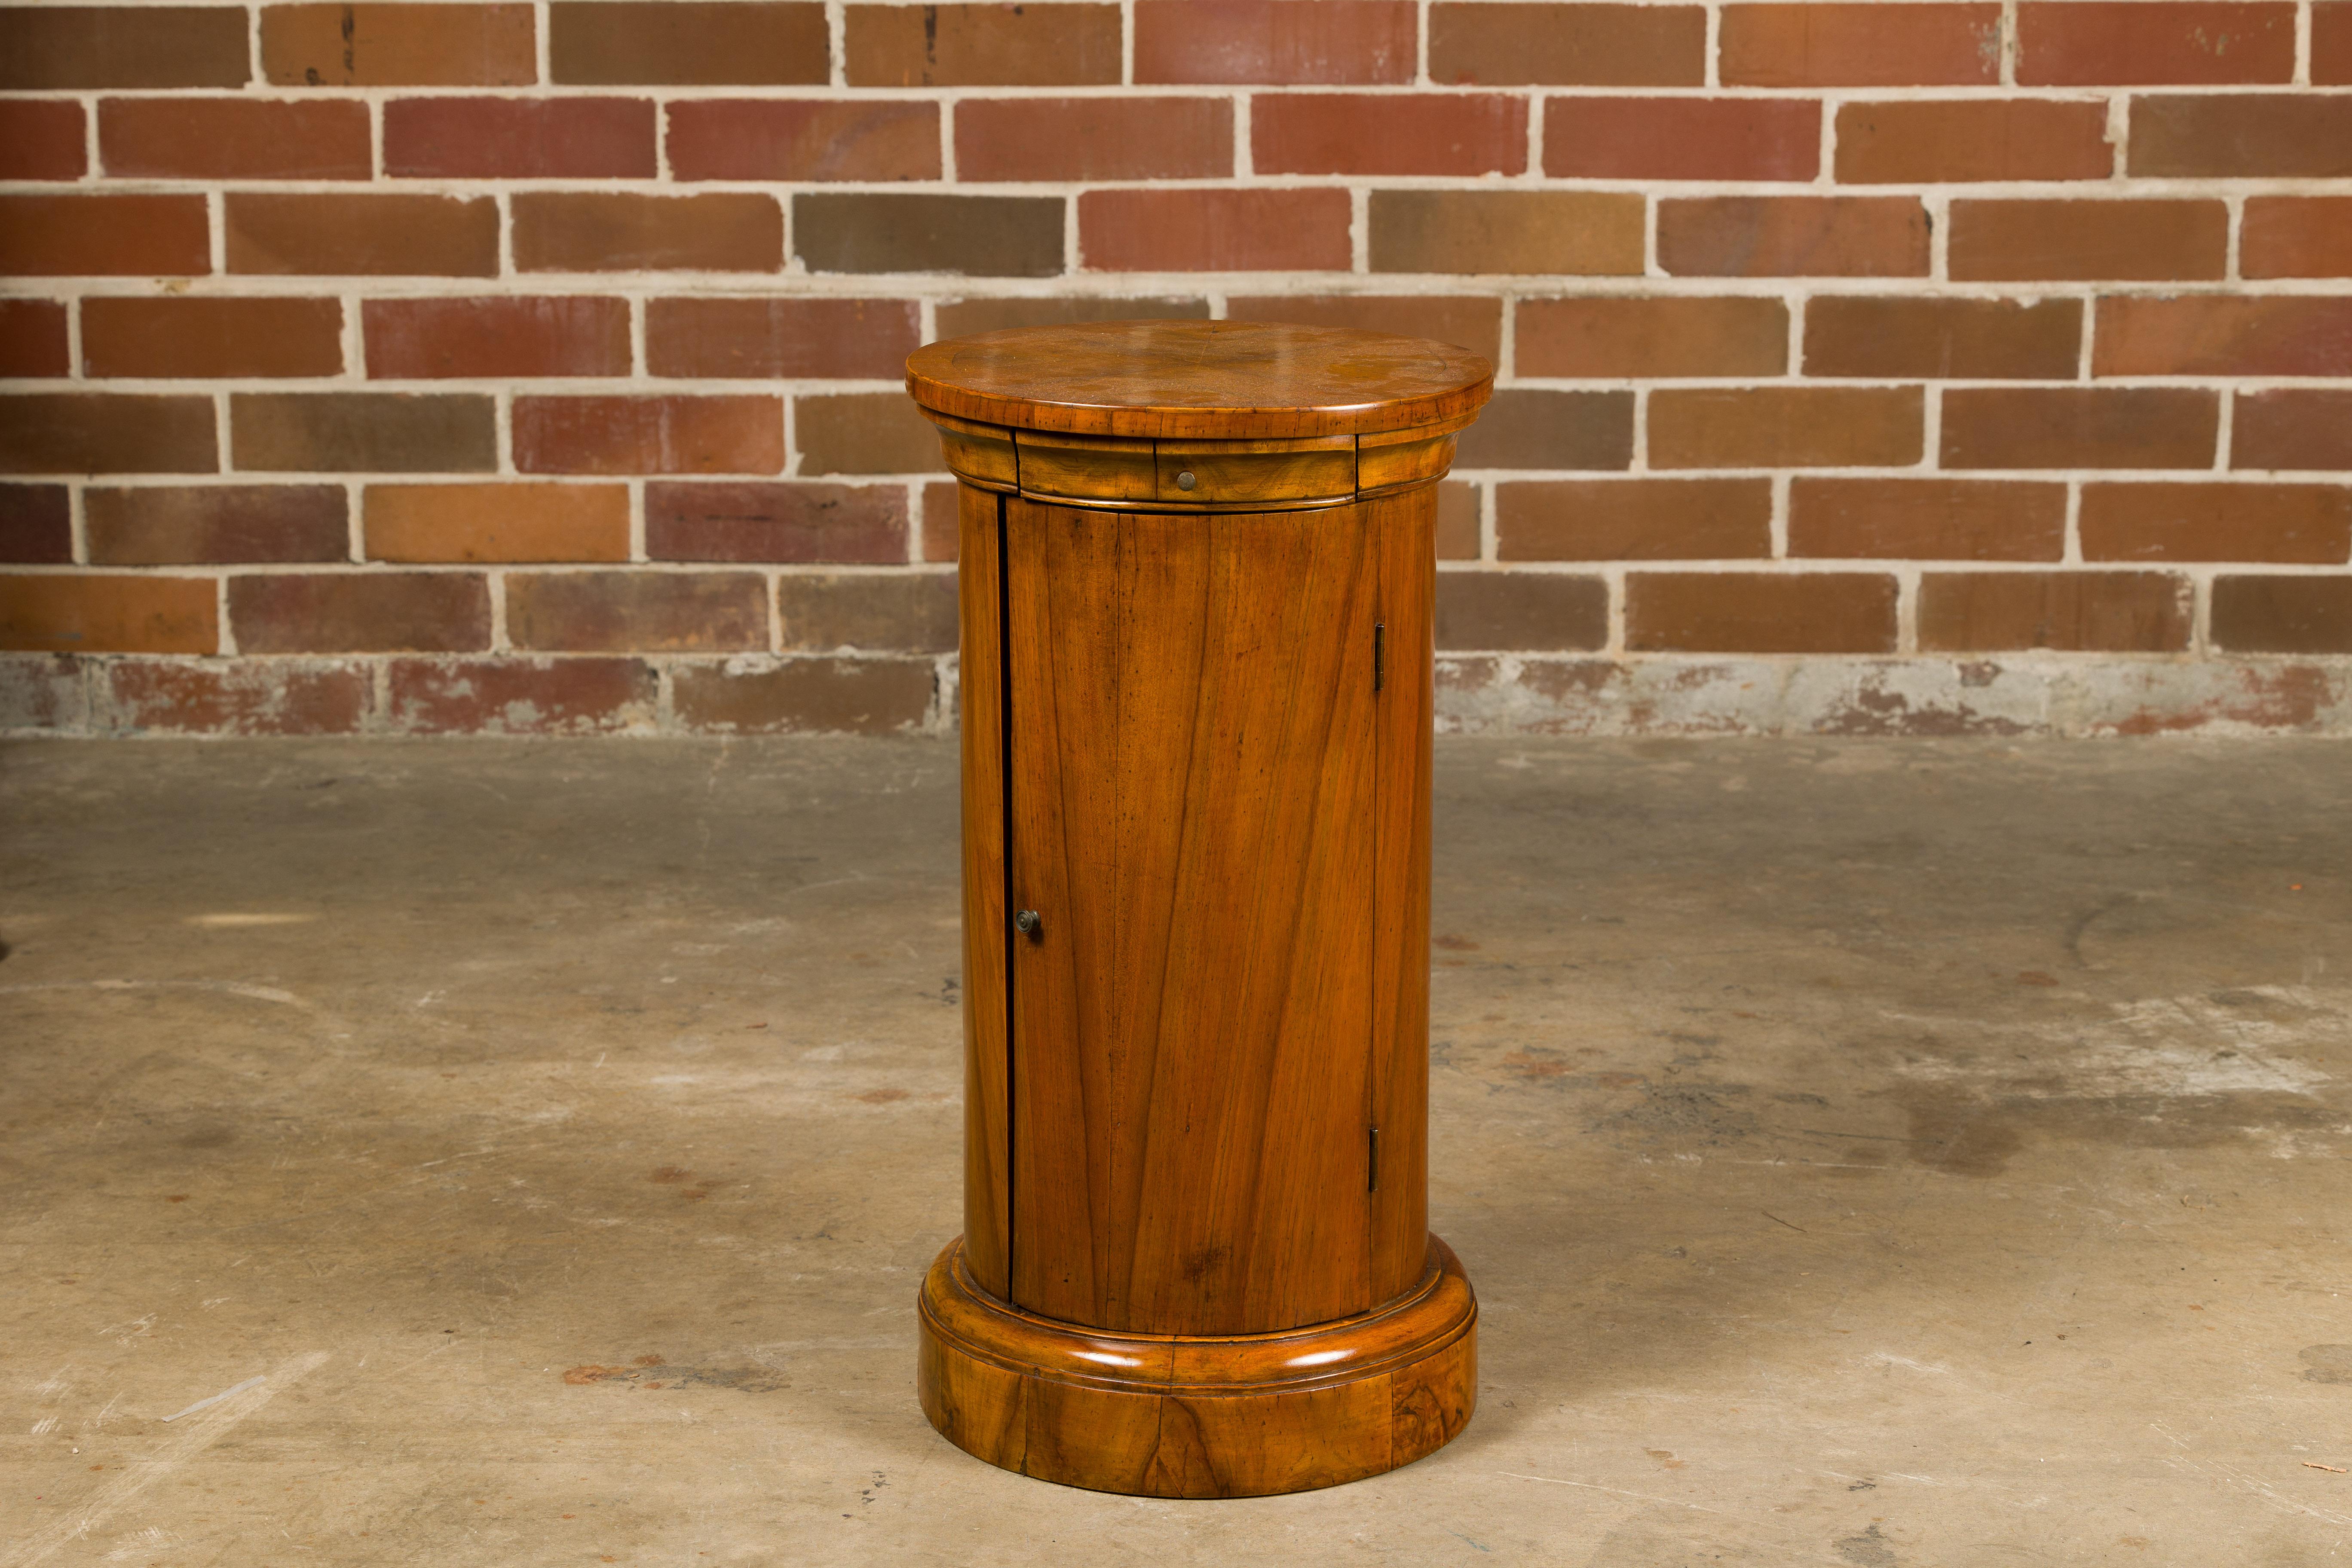 An Italian walnut drum table from the 19th century with bookmatched top, single door and single drawer. This 19th-century Italian walnut drum table is a testament to timeless craftsmanship and classic design. The table's surface is adorned with a